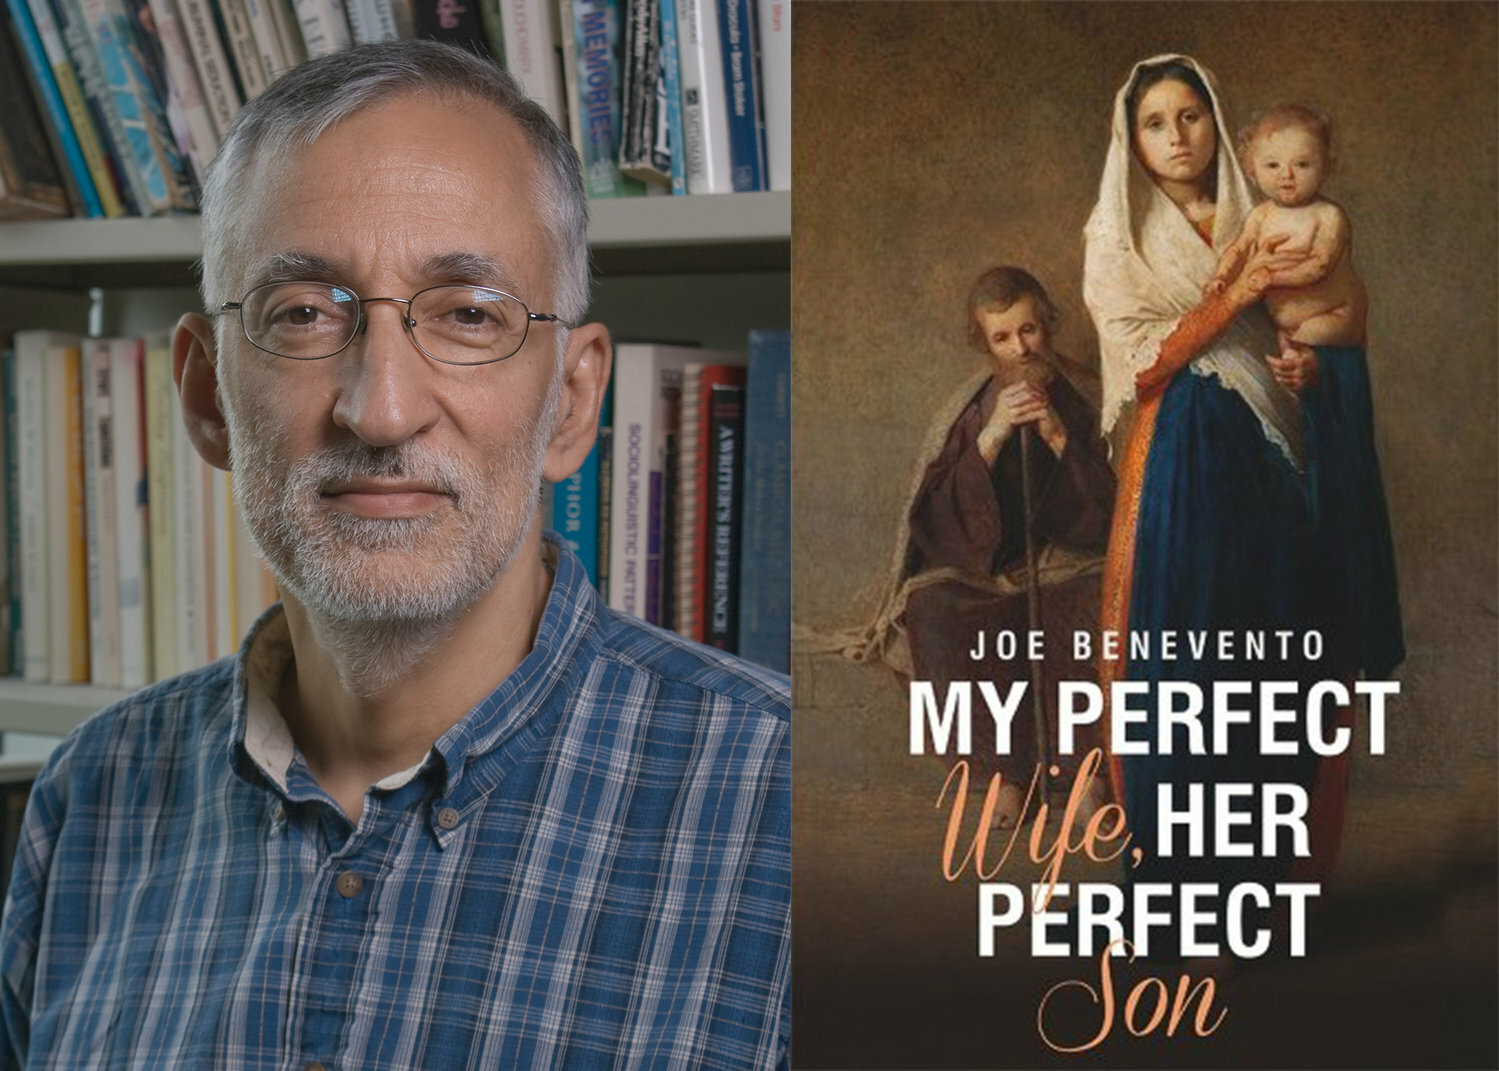 Joe Benevento, Ph.D., and the cover of his novel, "My Perfect Wife and Her Perfect Son." Dr. Benevento is donating 100% of the royalties for the book to Catholic Charities of Central and Northern Missouri.